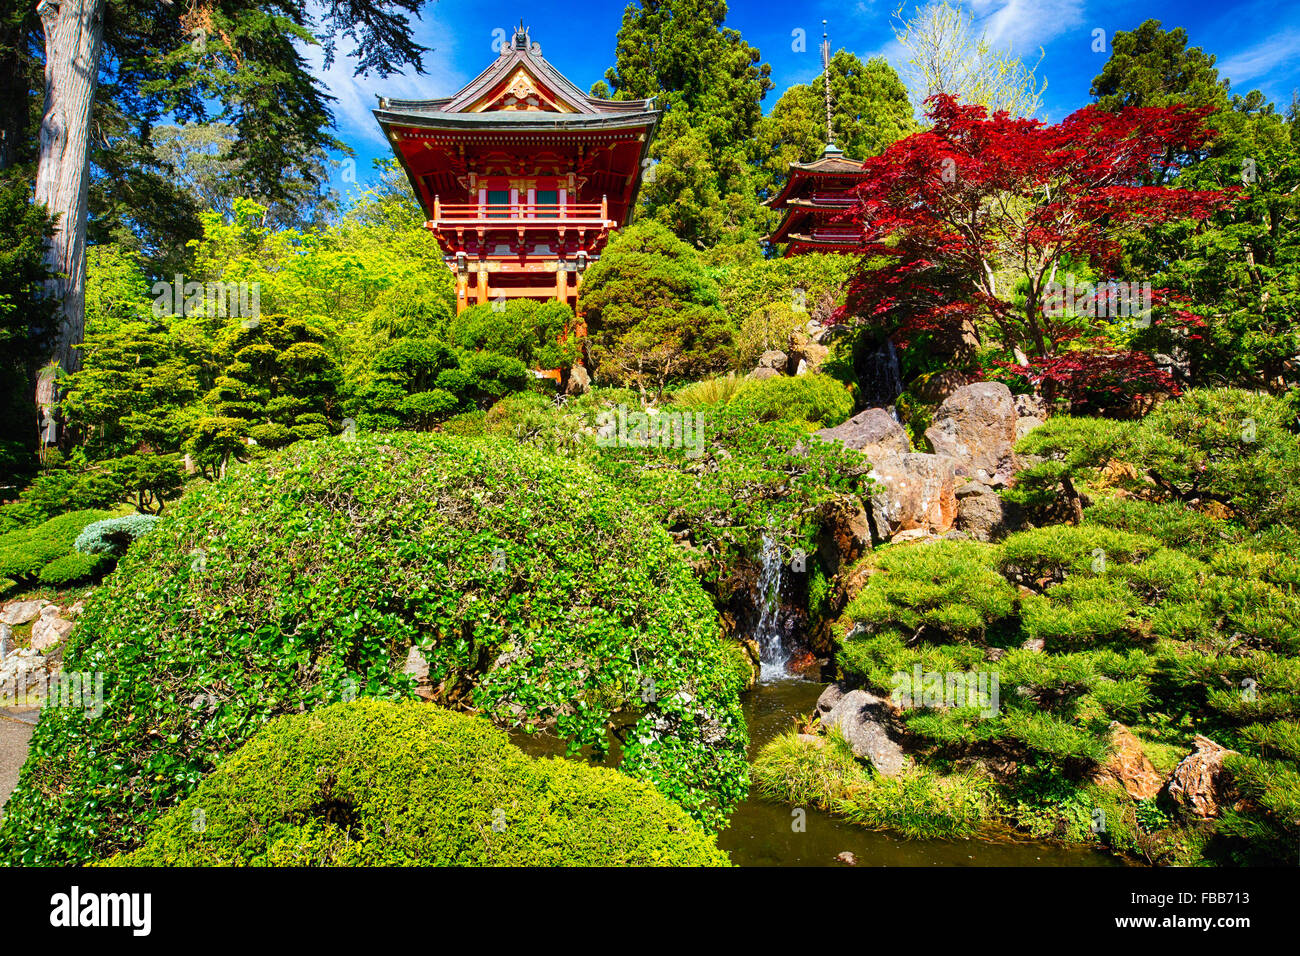 Low Angle View of Traditional Japanese Pavilions in a Garden with a Small Waterfall, Japanese Tea Garden, Golden Gate Park, San Stock Photo